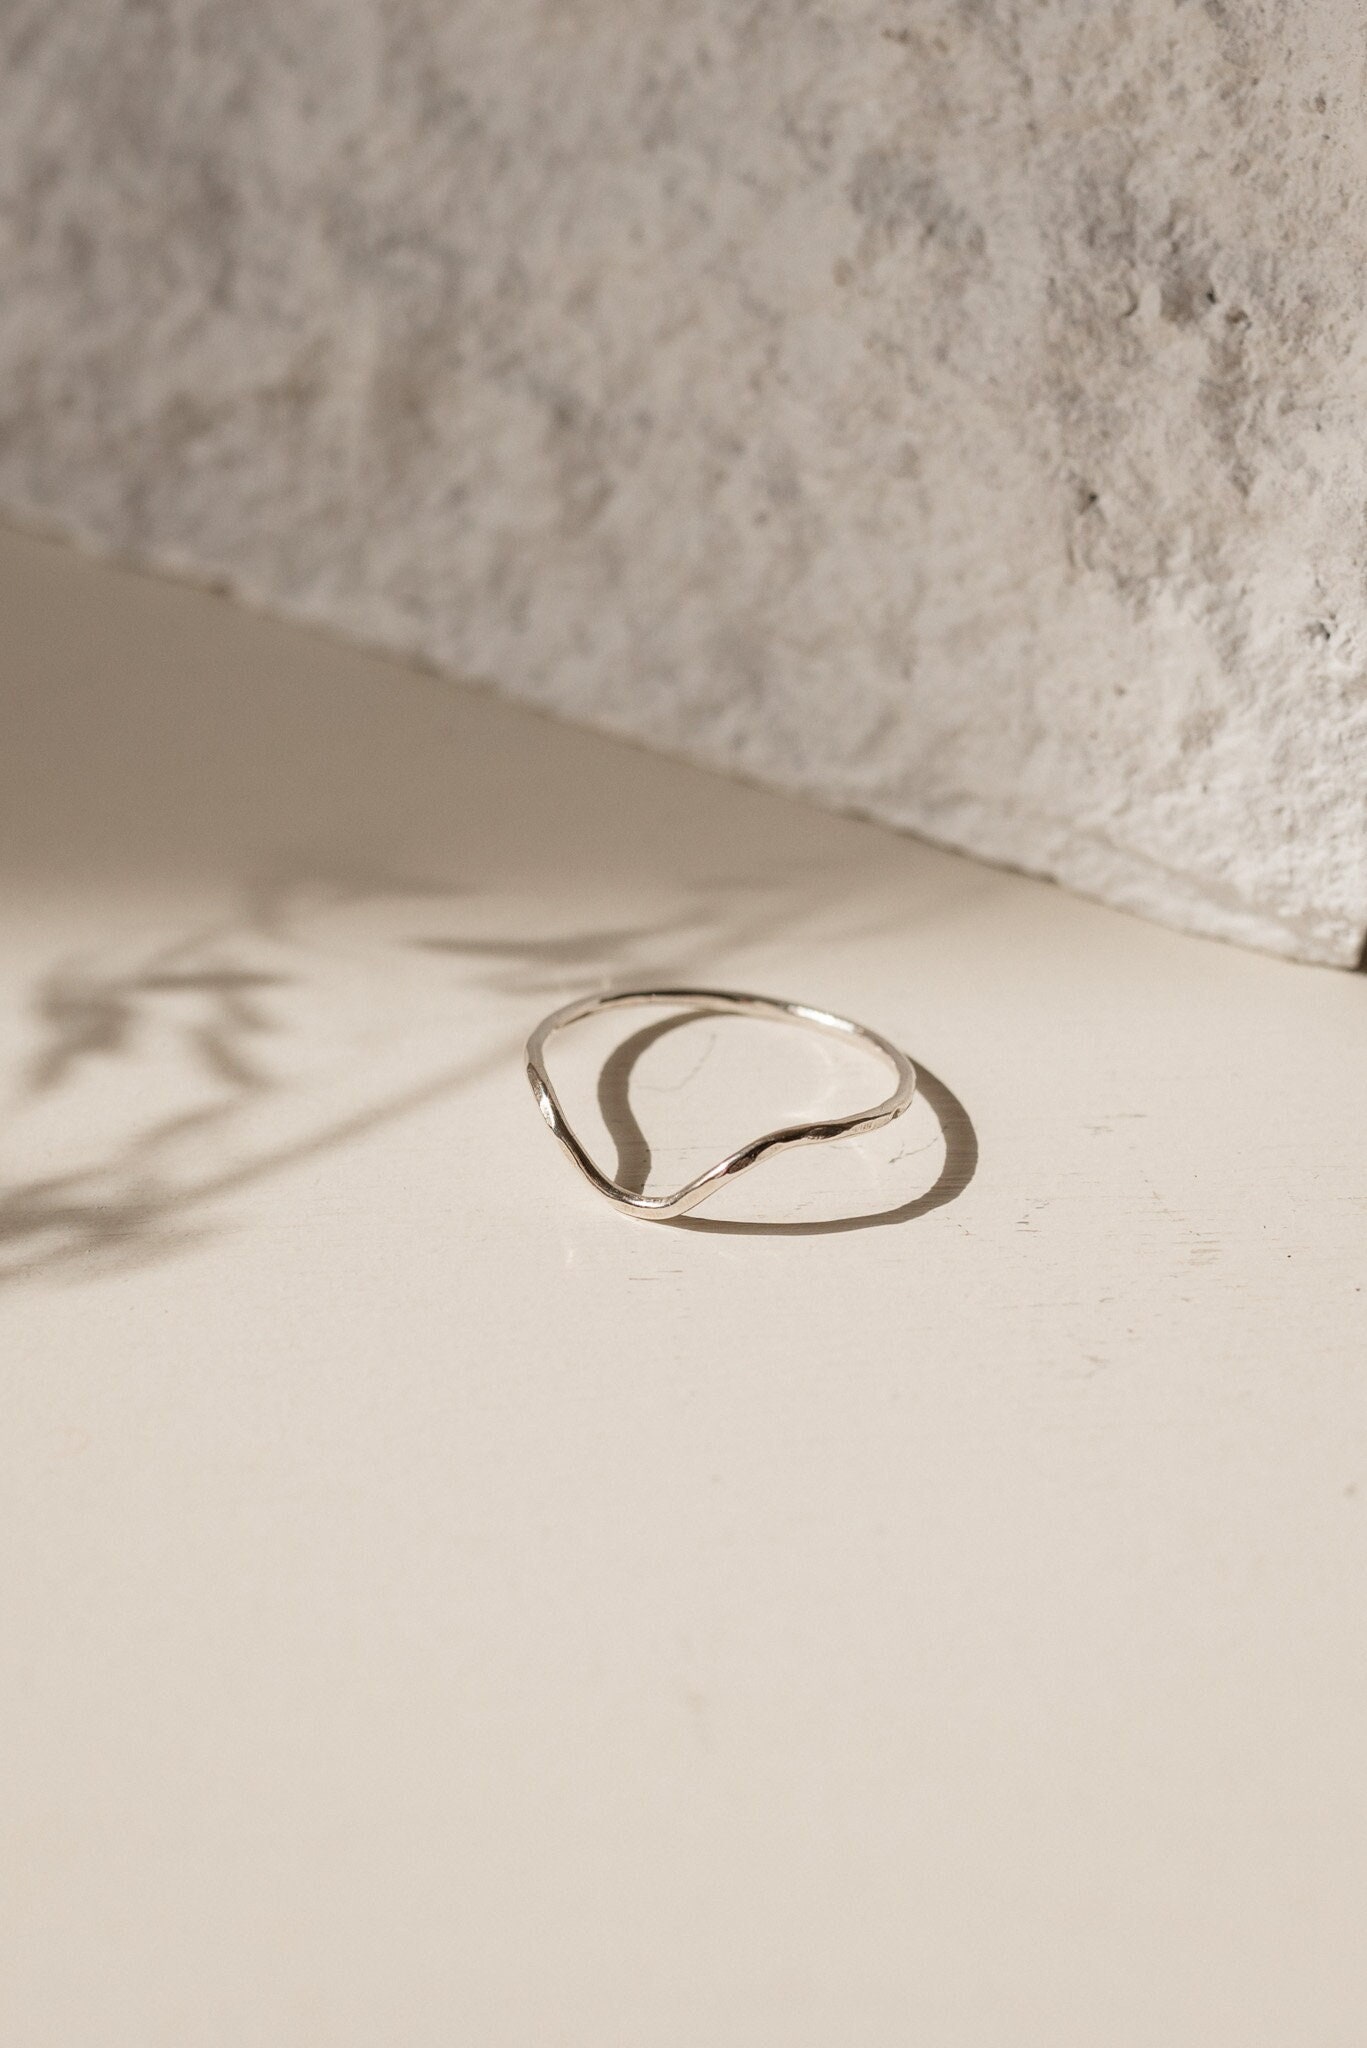 Eco Silver Curve Stacking Ring - 100% Recycled Sterling Silver